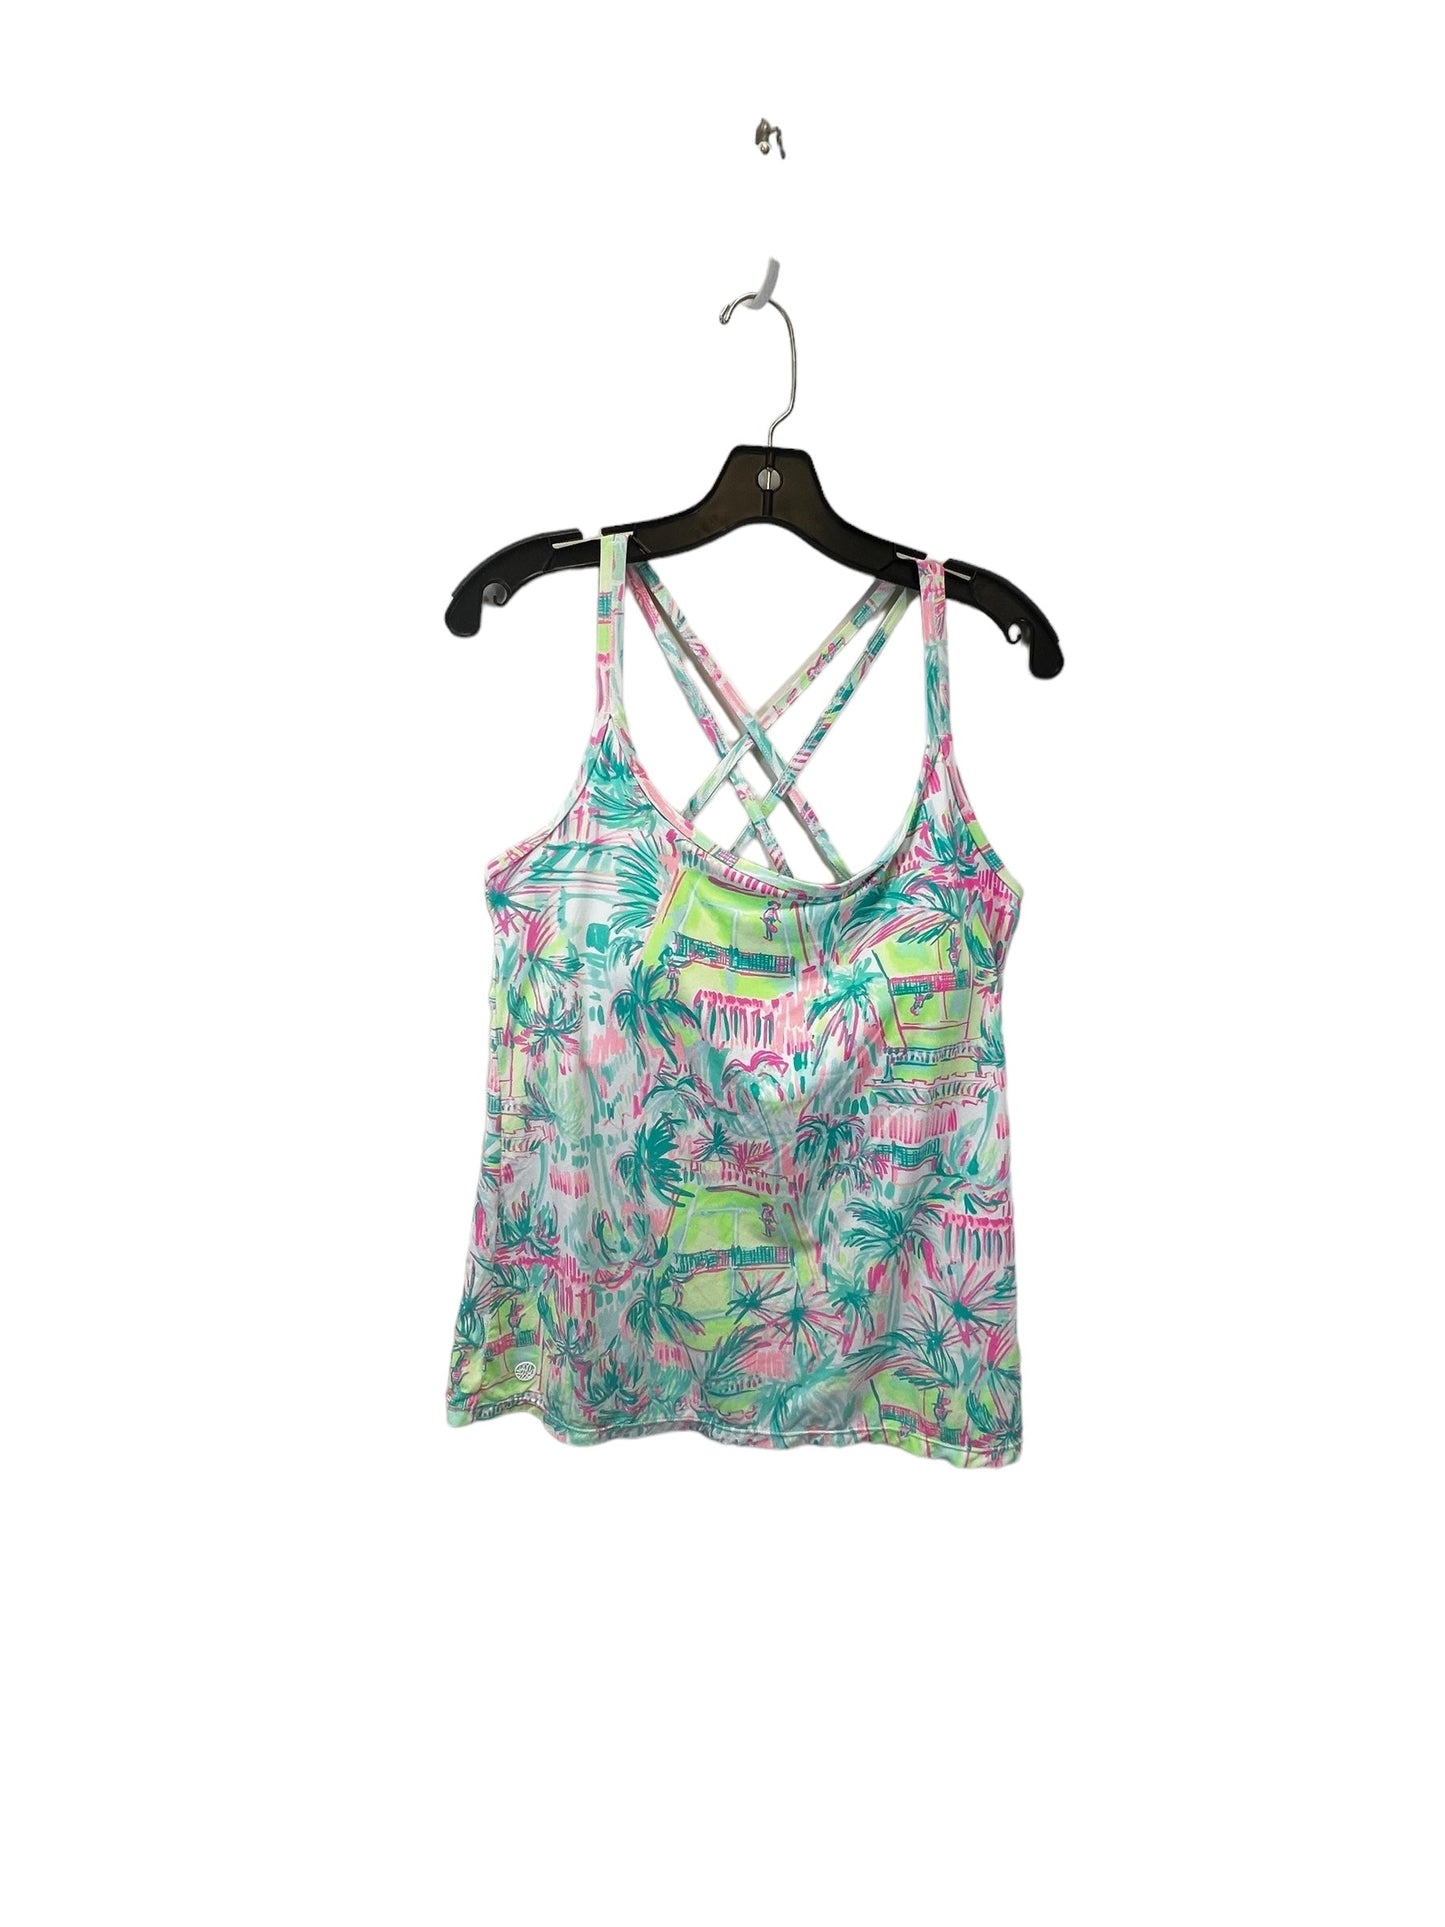 Green & Pink Athletic Tank Top Lilly Pulitzer, Size L